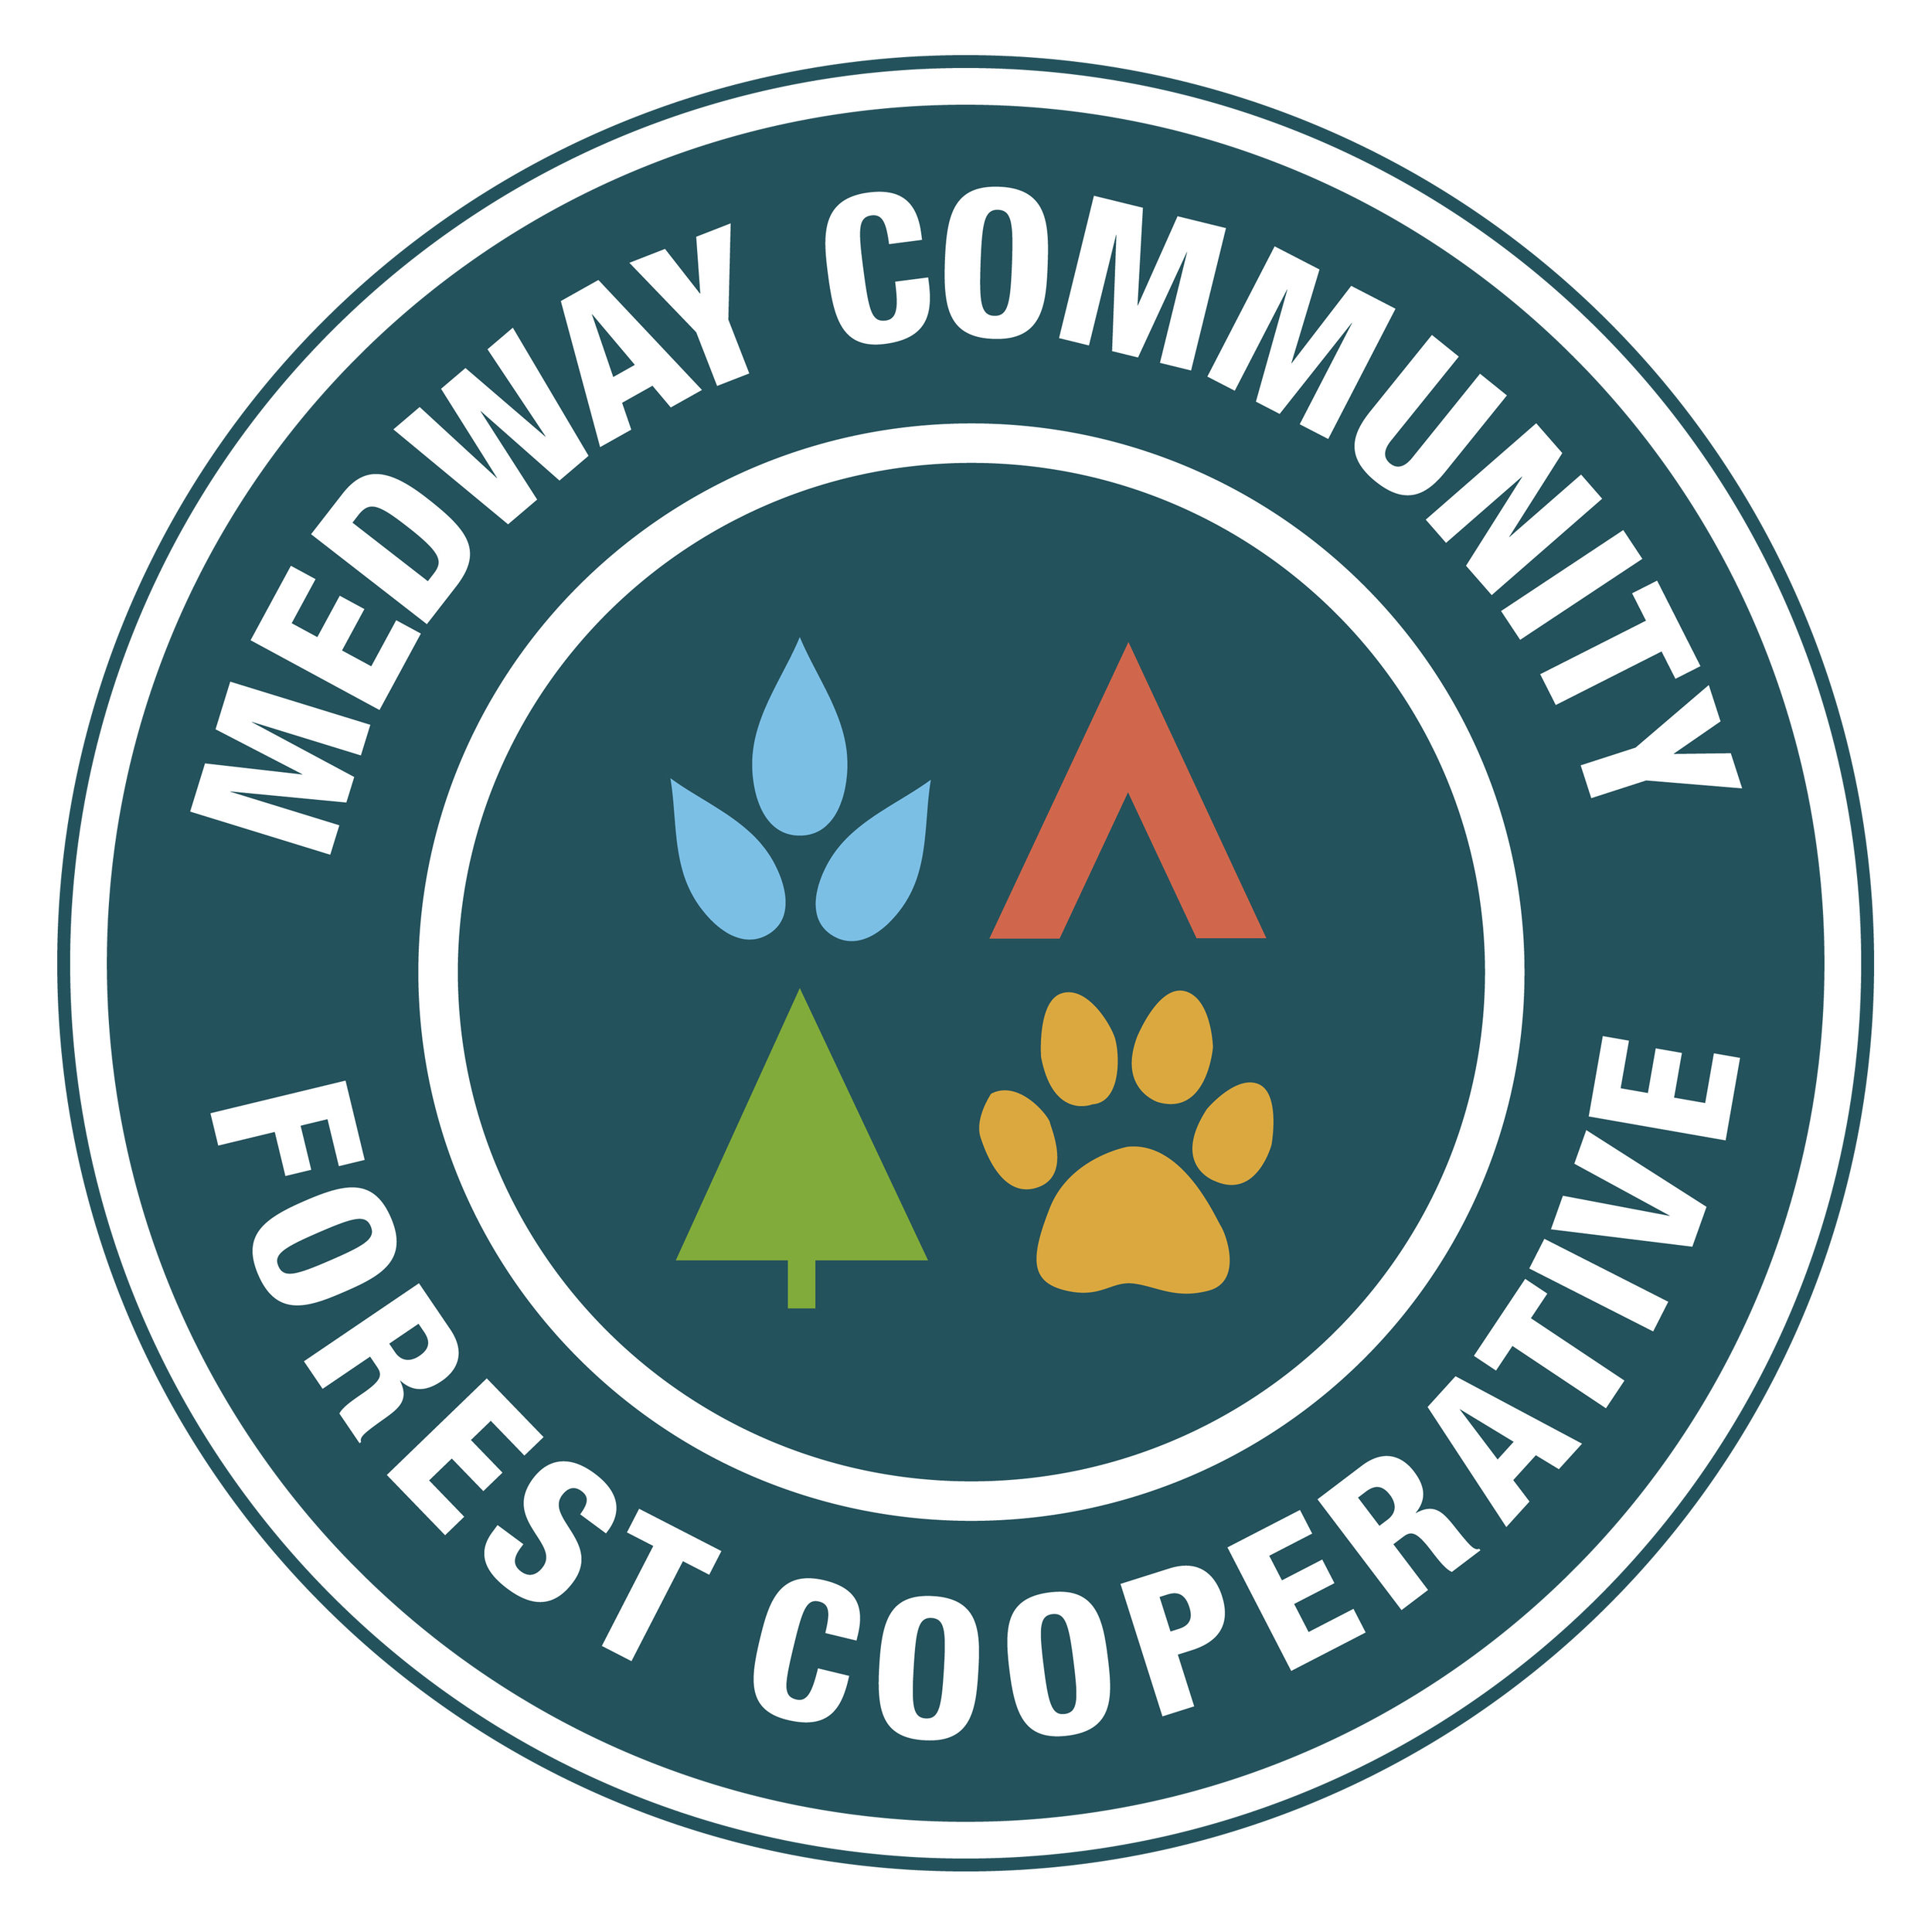 Medway Community Forest Cooperative